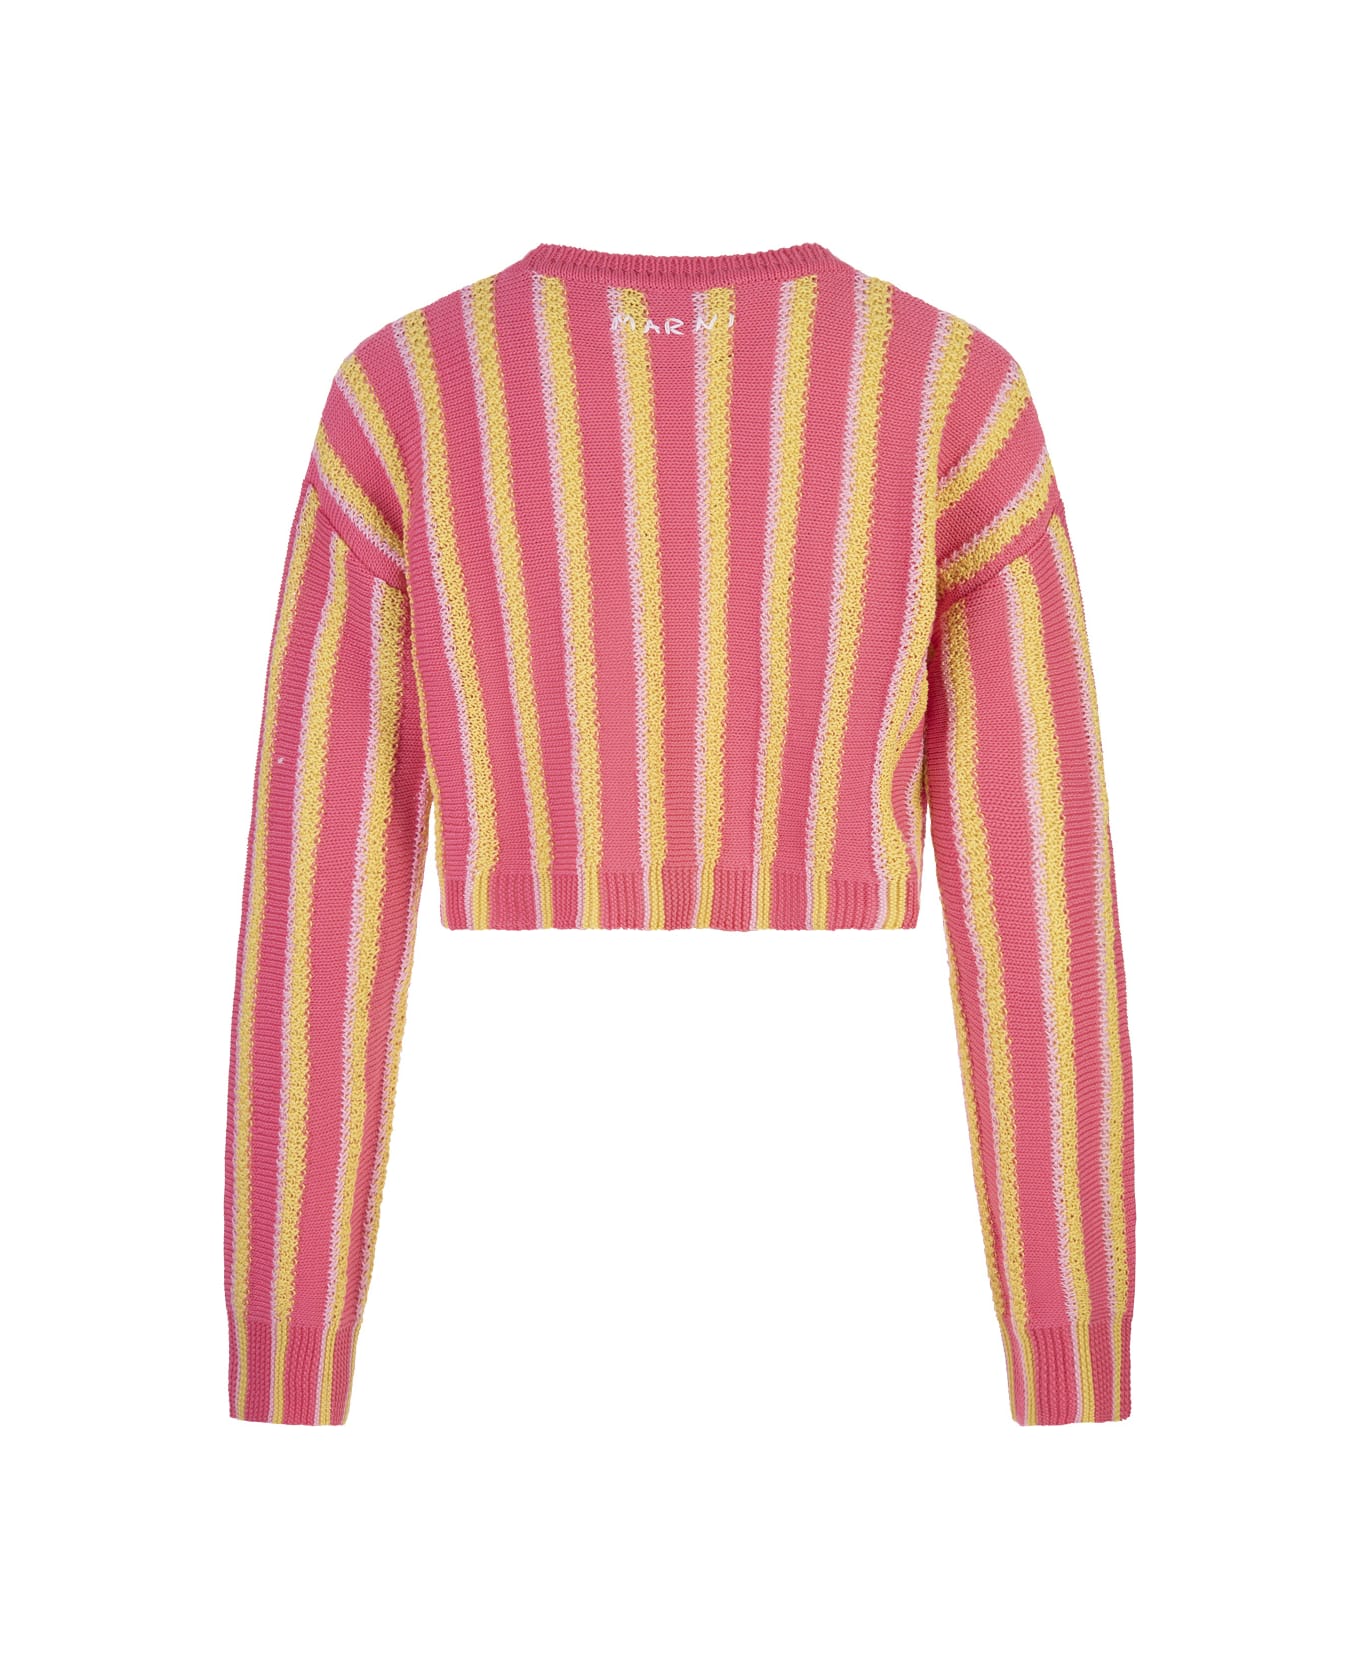 Marni Pink, Yellow And White Striped Knitted Crop Pullover - Pink ニットウェア